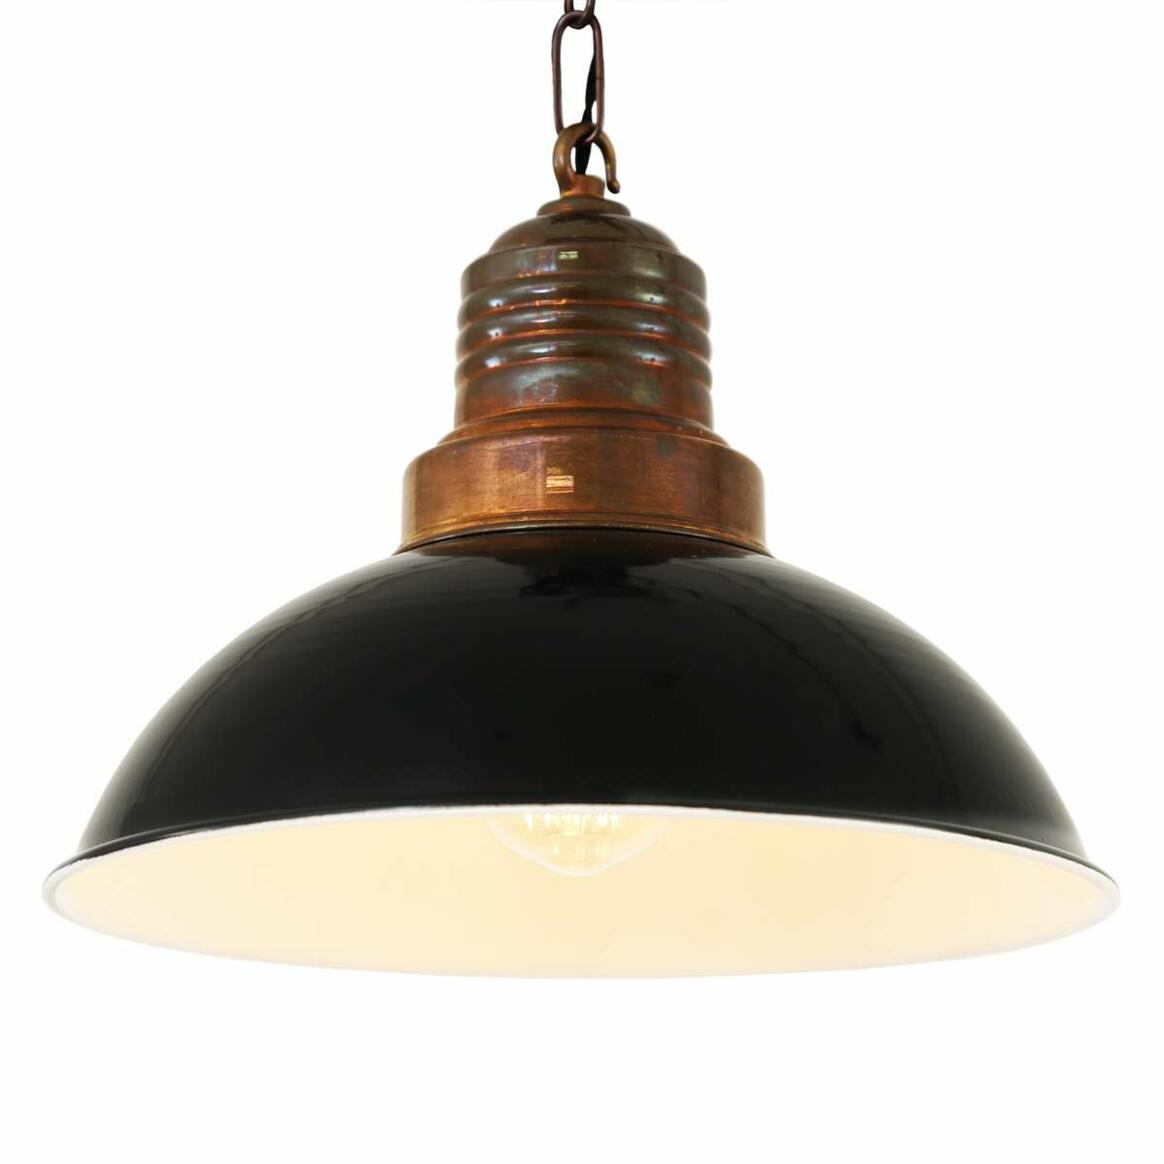 Ypres Industrial Factory Pendant Light 11.8" main product image